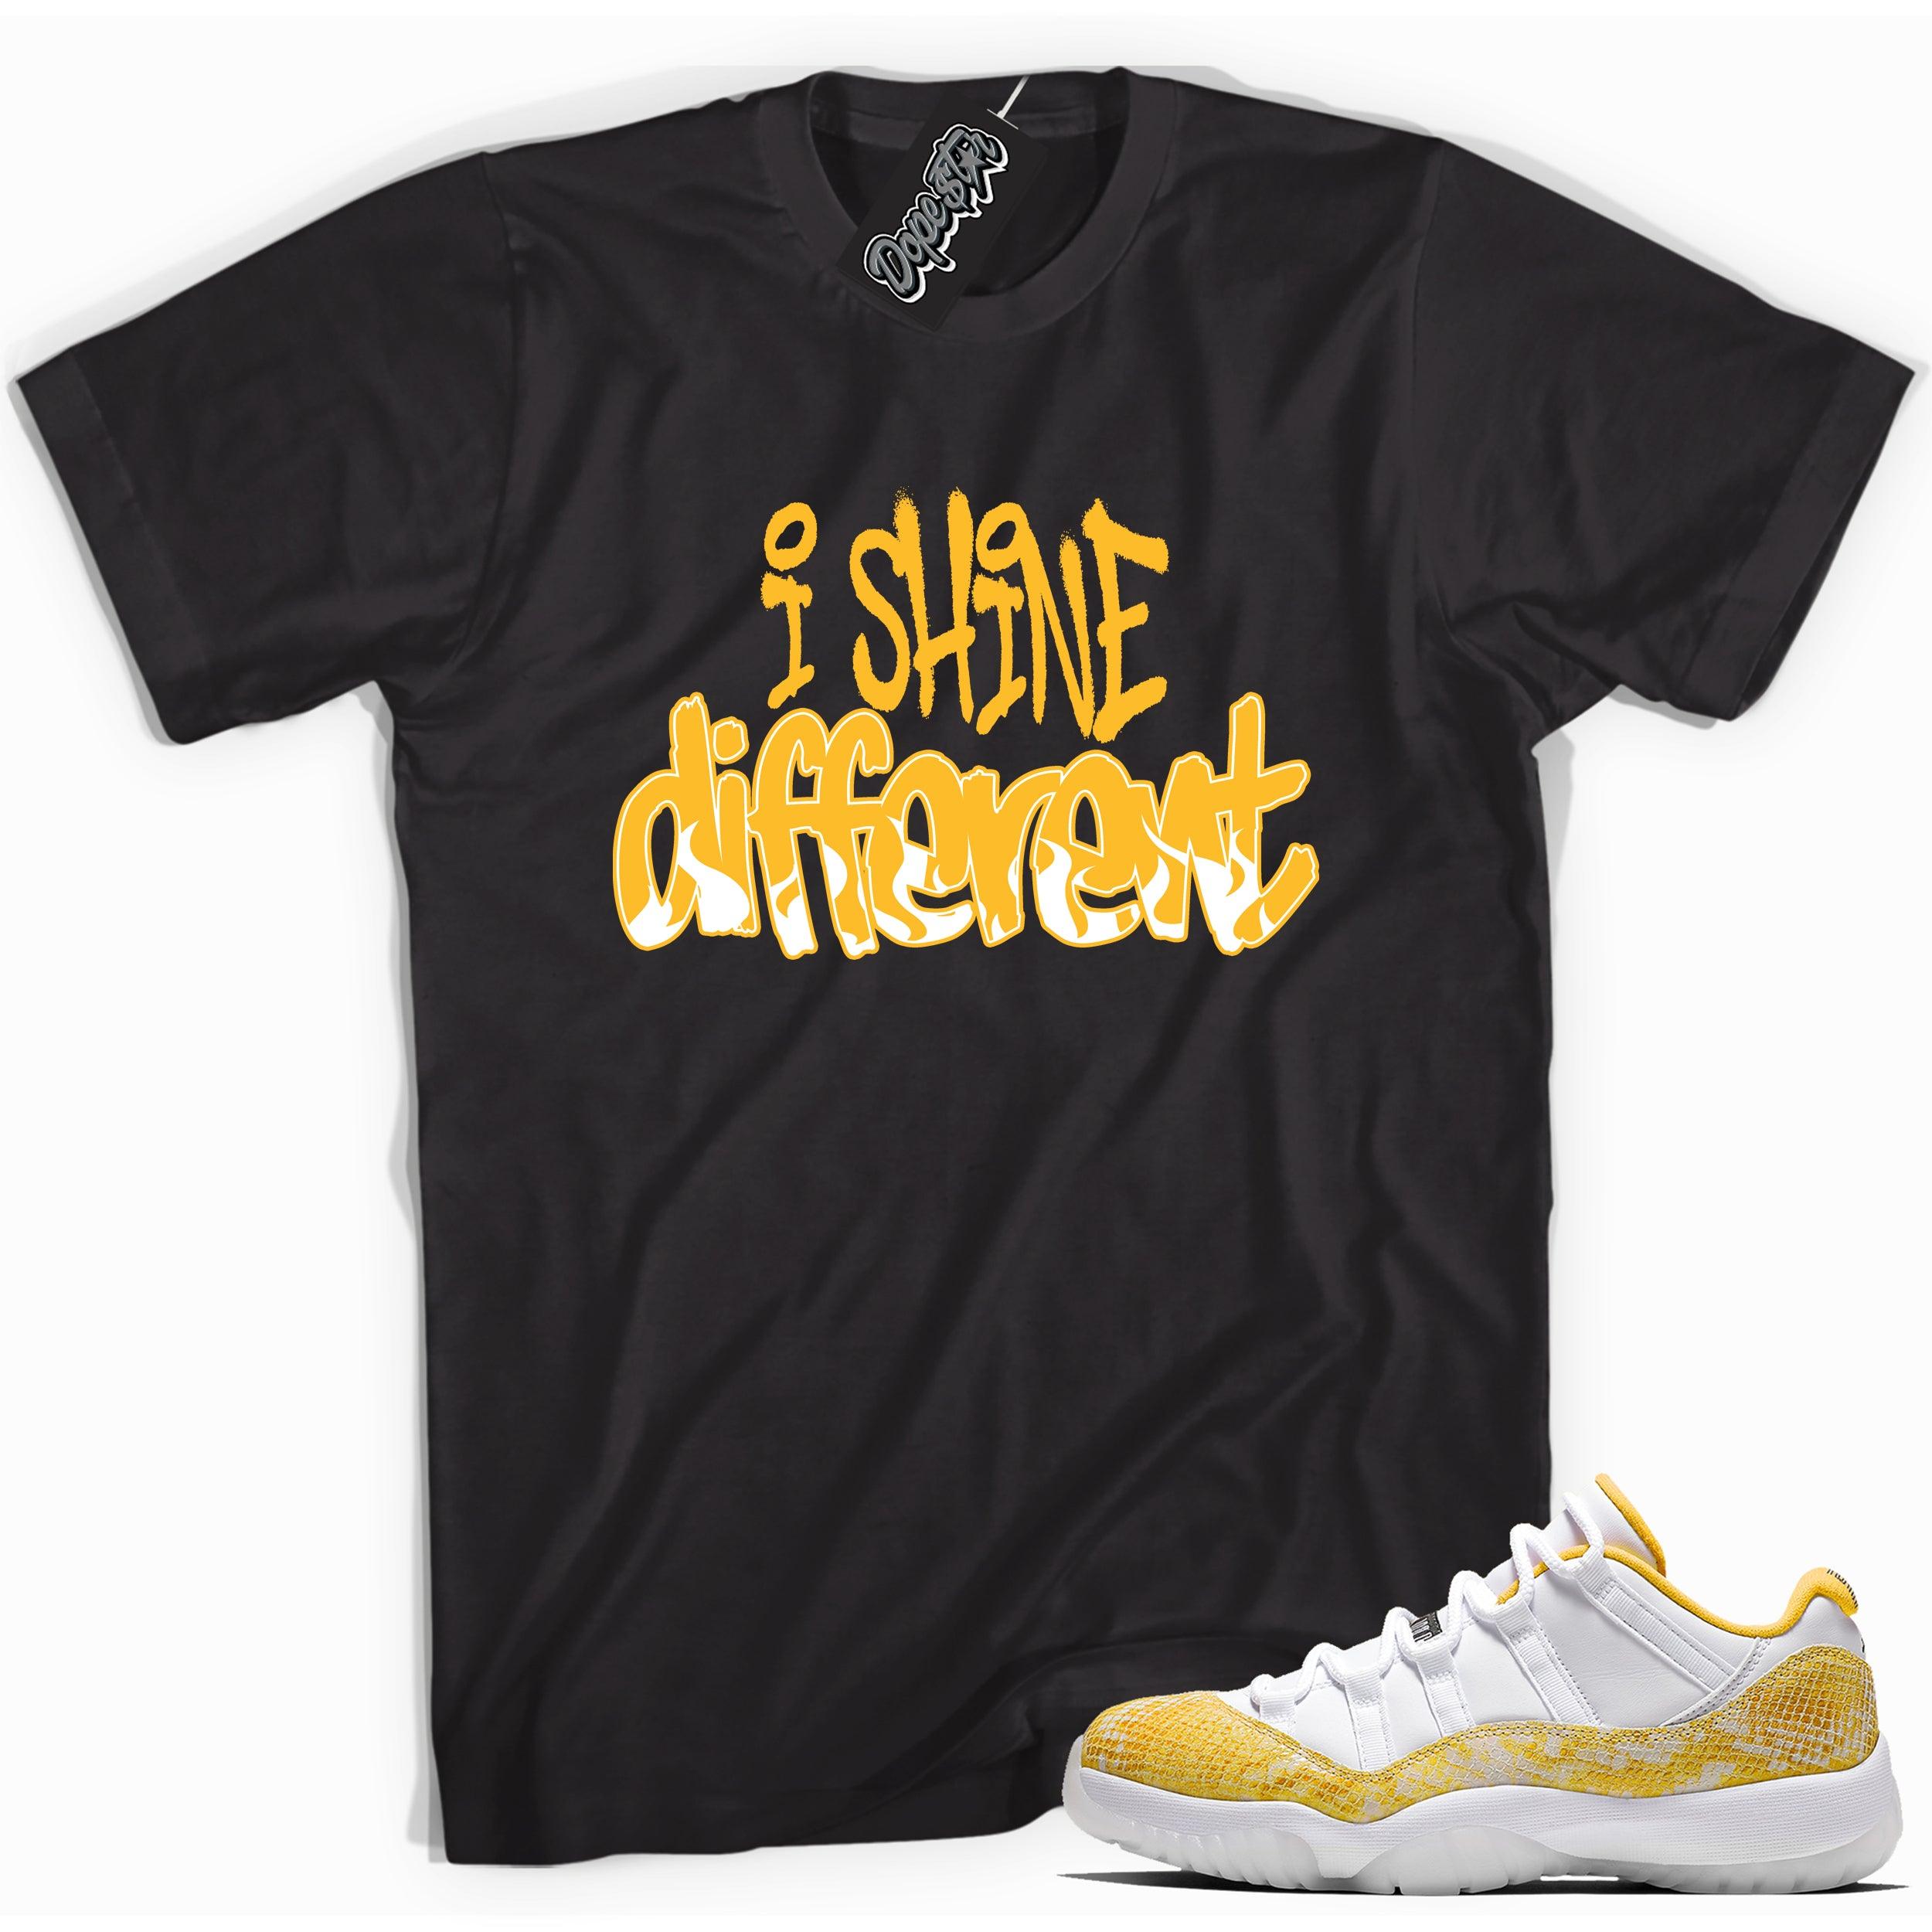 Cool black graphic tee with 'i shine different' print, that perfectly matches  Air Jordan 11 Low Yellow Snakeskin sneakers